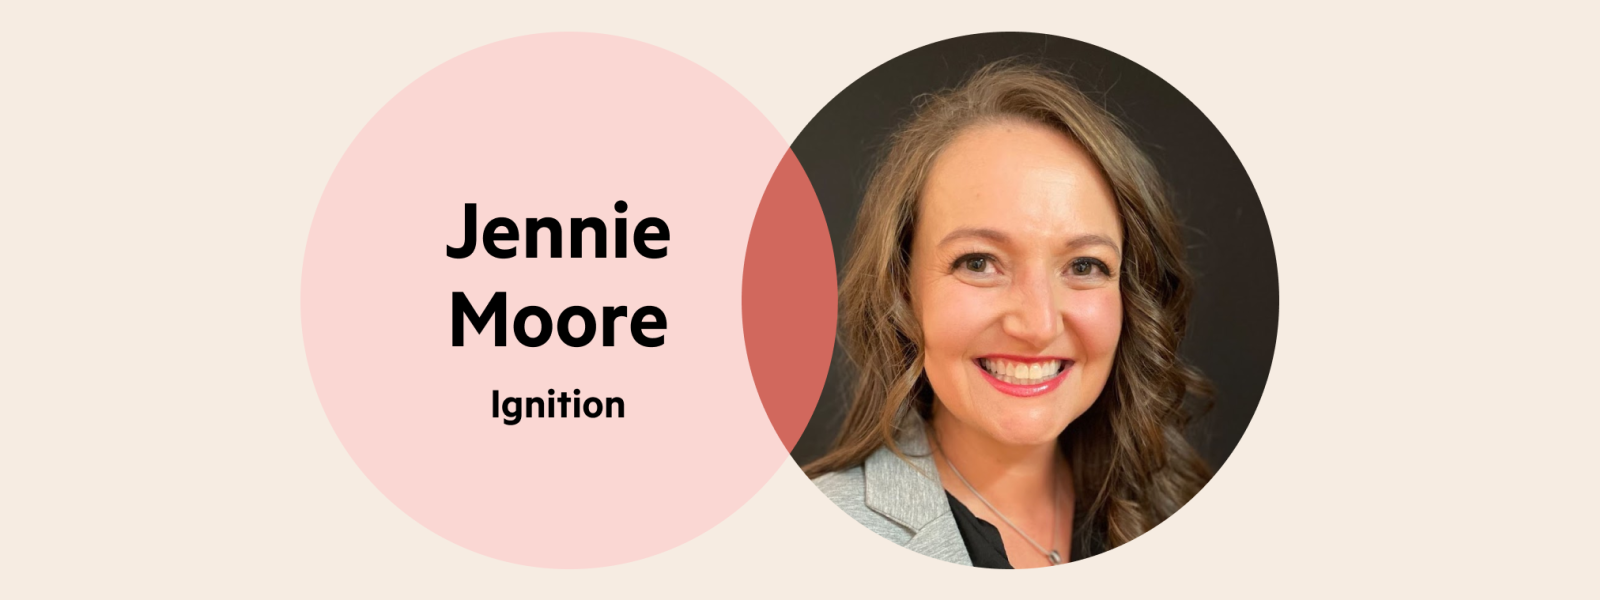 Jennie Moore's headshot next to her name and 'Ignition'.